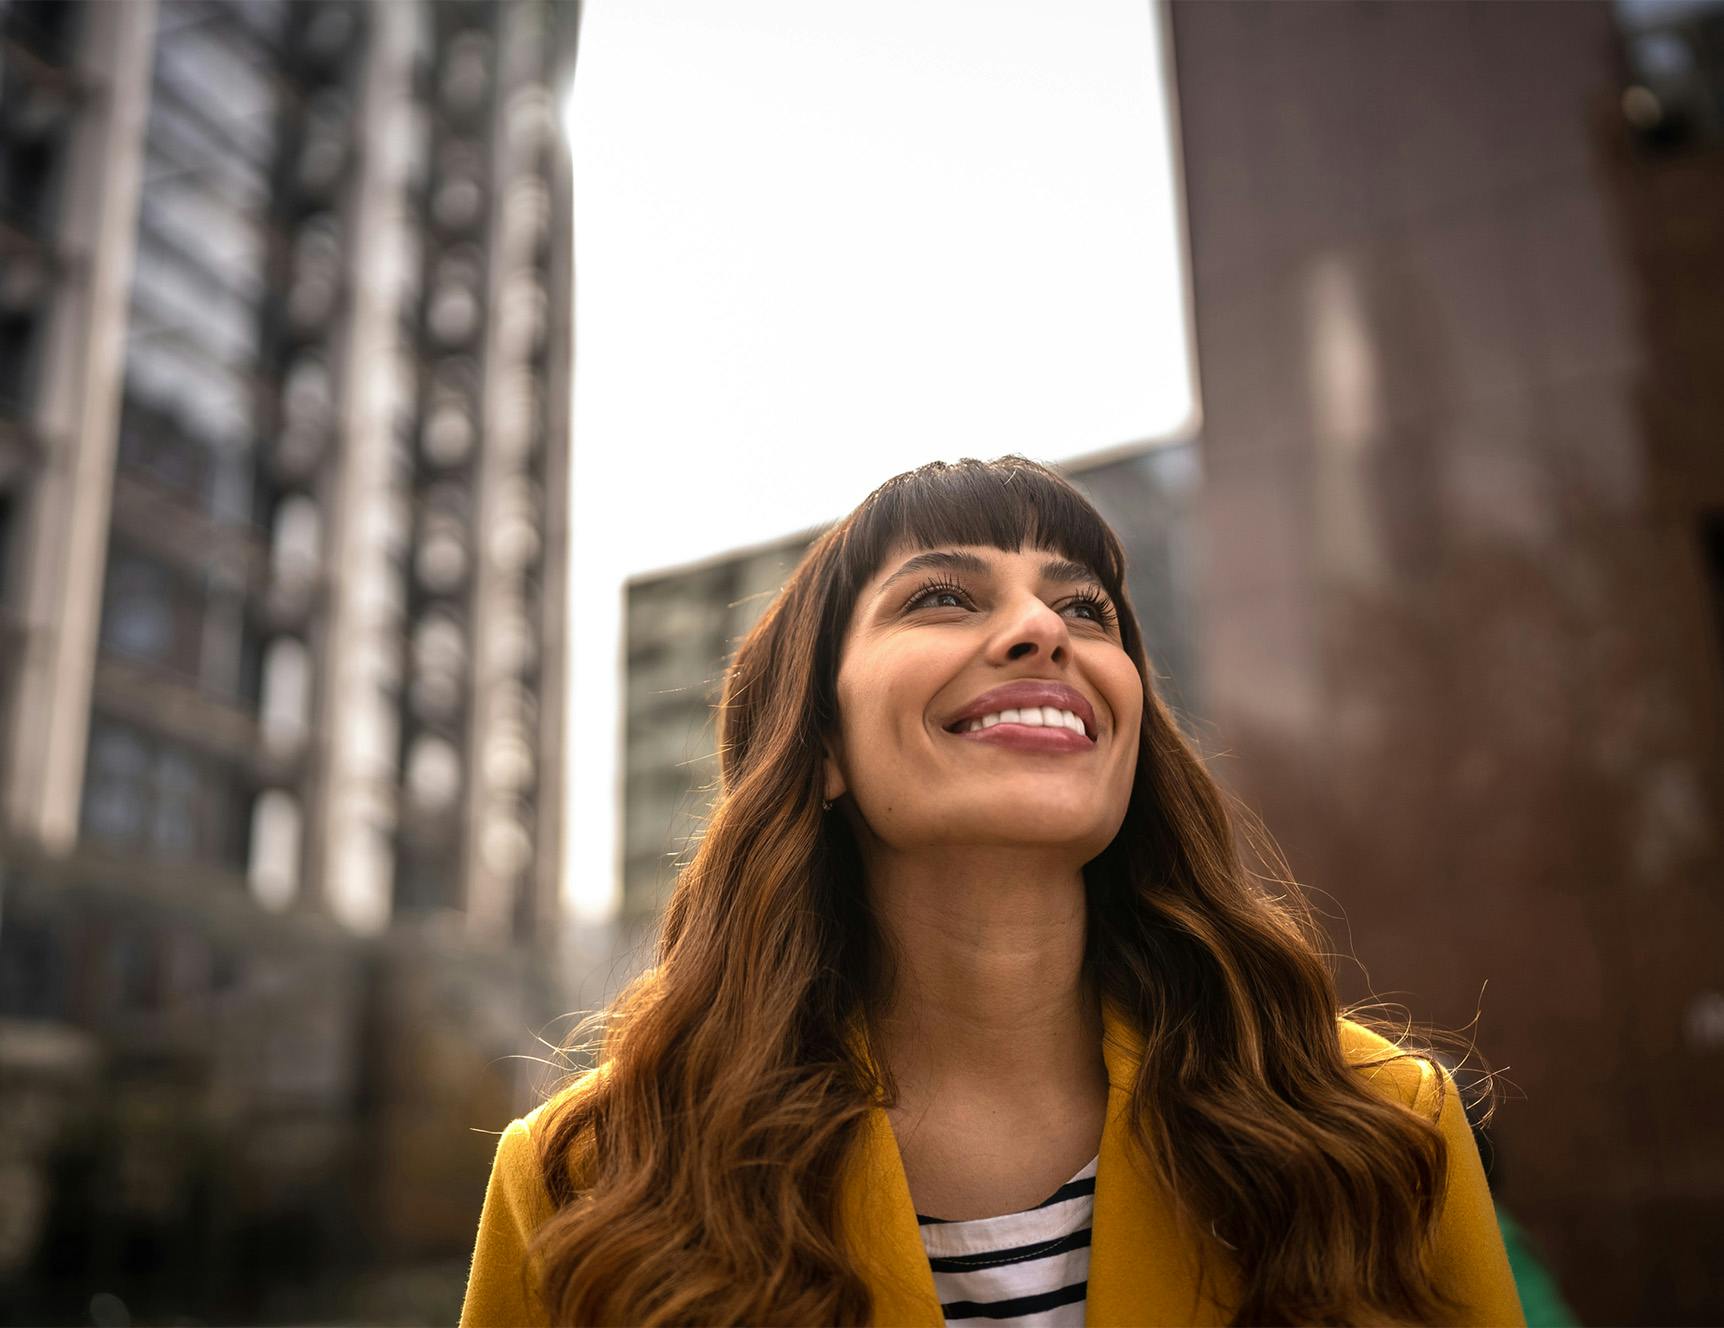 woman smiling and looking up at tall buildings